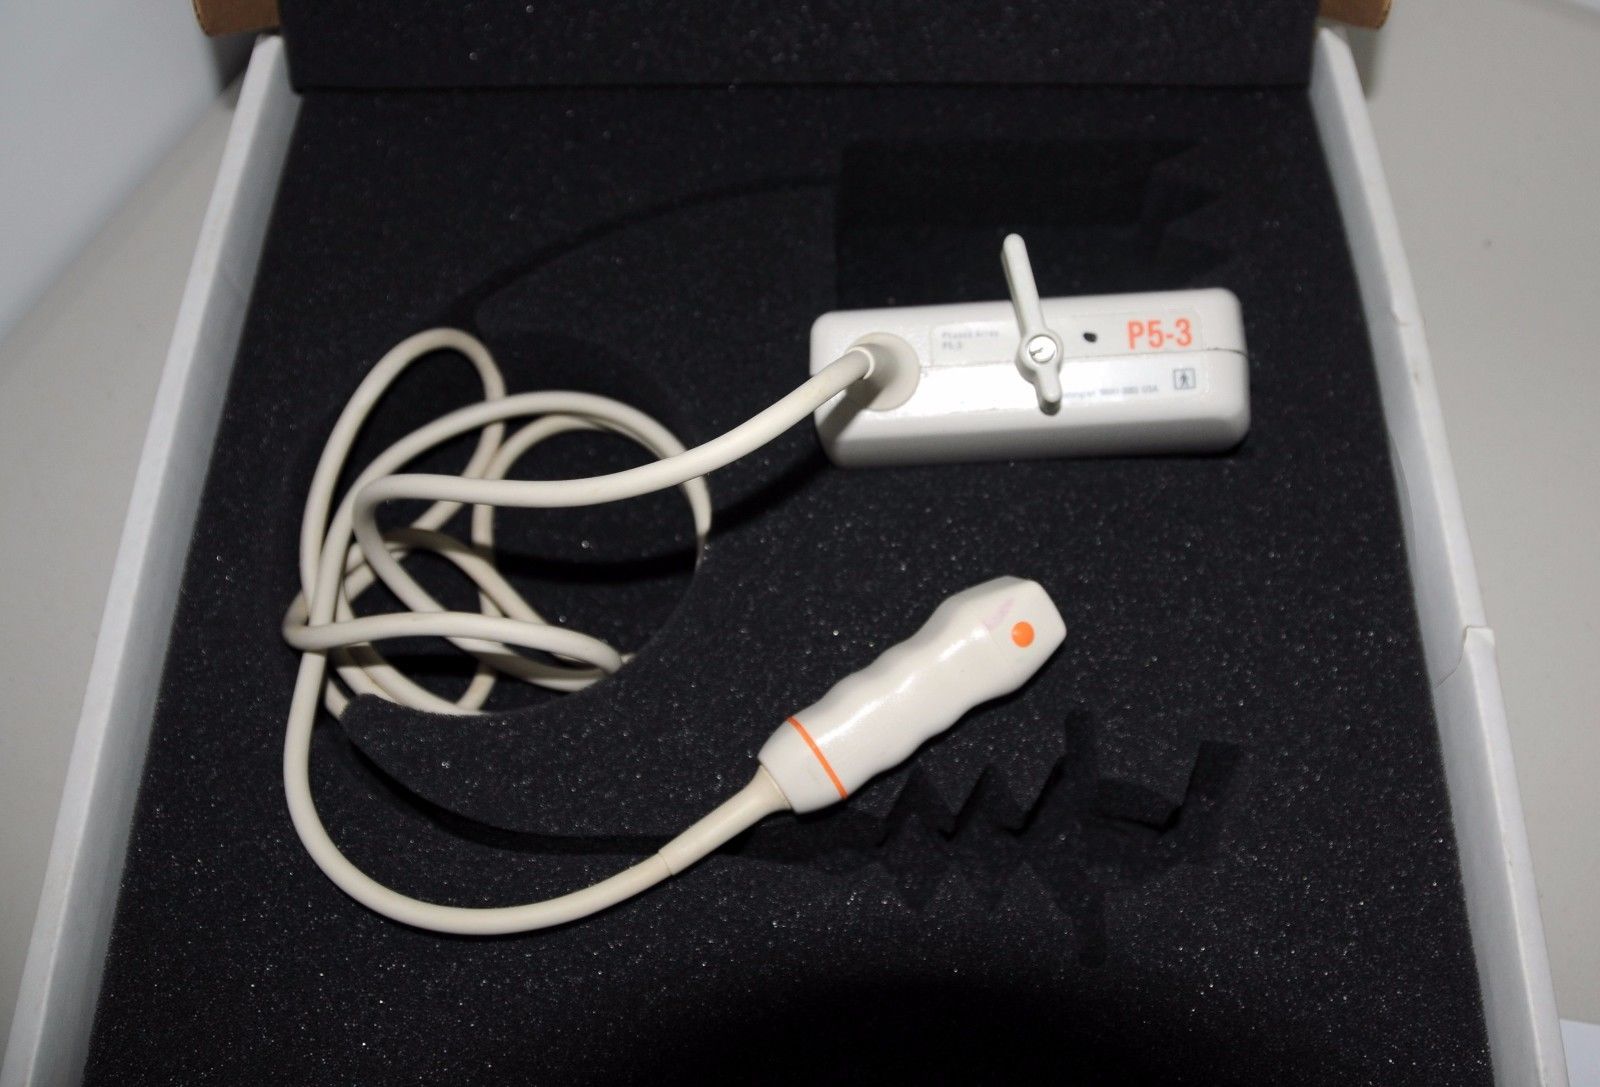 Philips ATL Ultrasound Probe, Transducer P 5-3 Phased Array #6 DIAGNOSTIC ULTRASOUND MACHINES FOR SALE